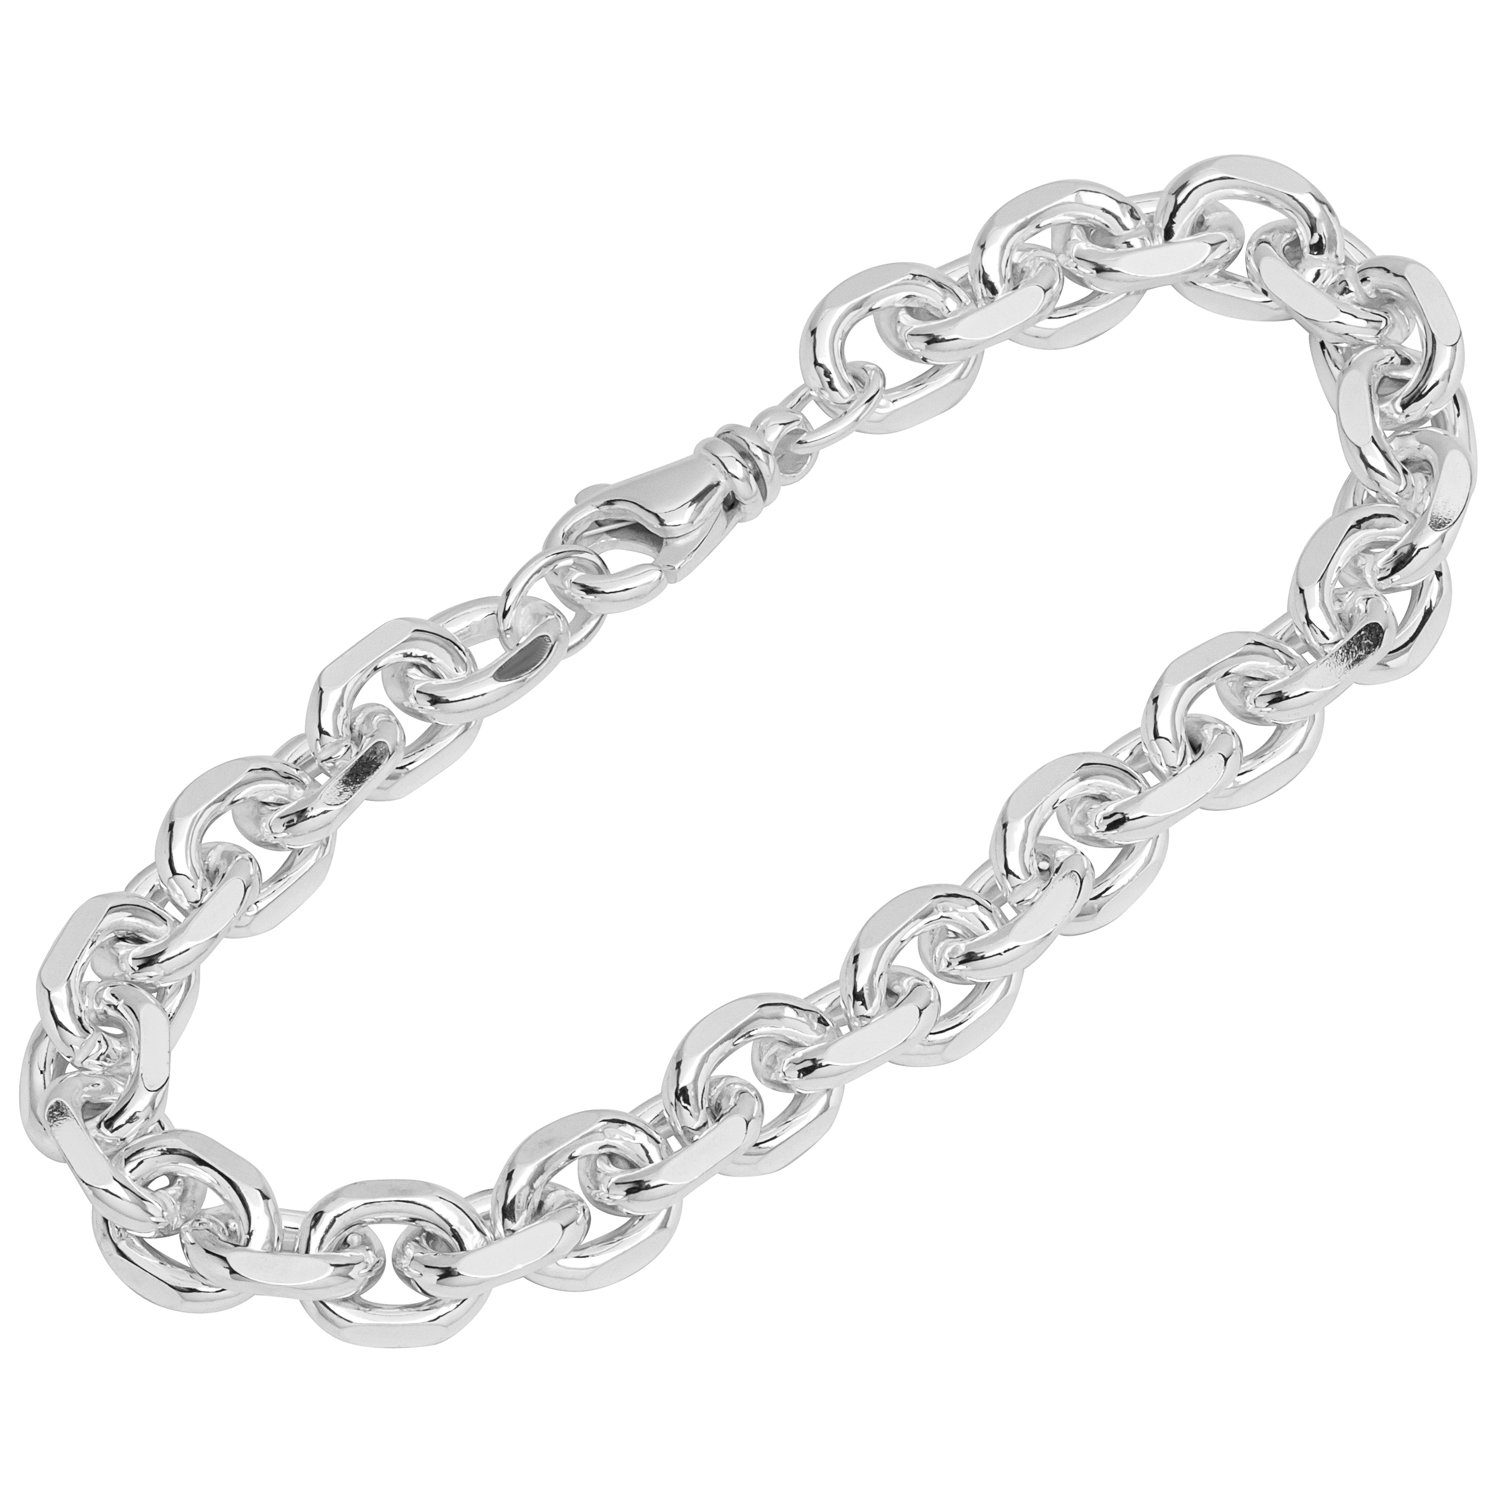 (1 Made Silberarmband Silber 925 22cm Stück), in fach 4 Armband NKlaus Germany Sterling Ankerkette